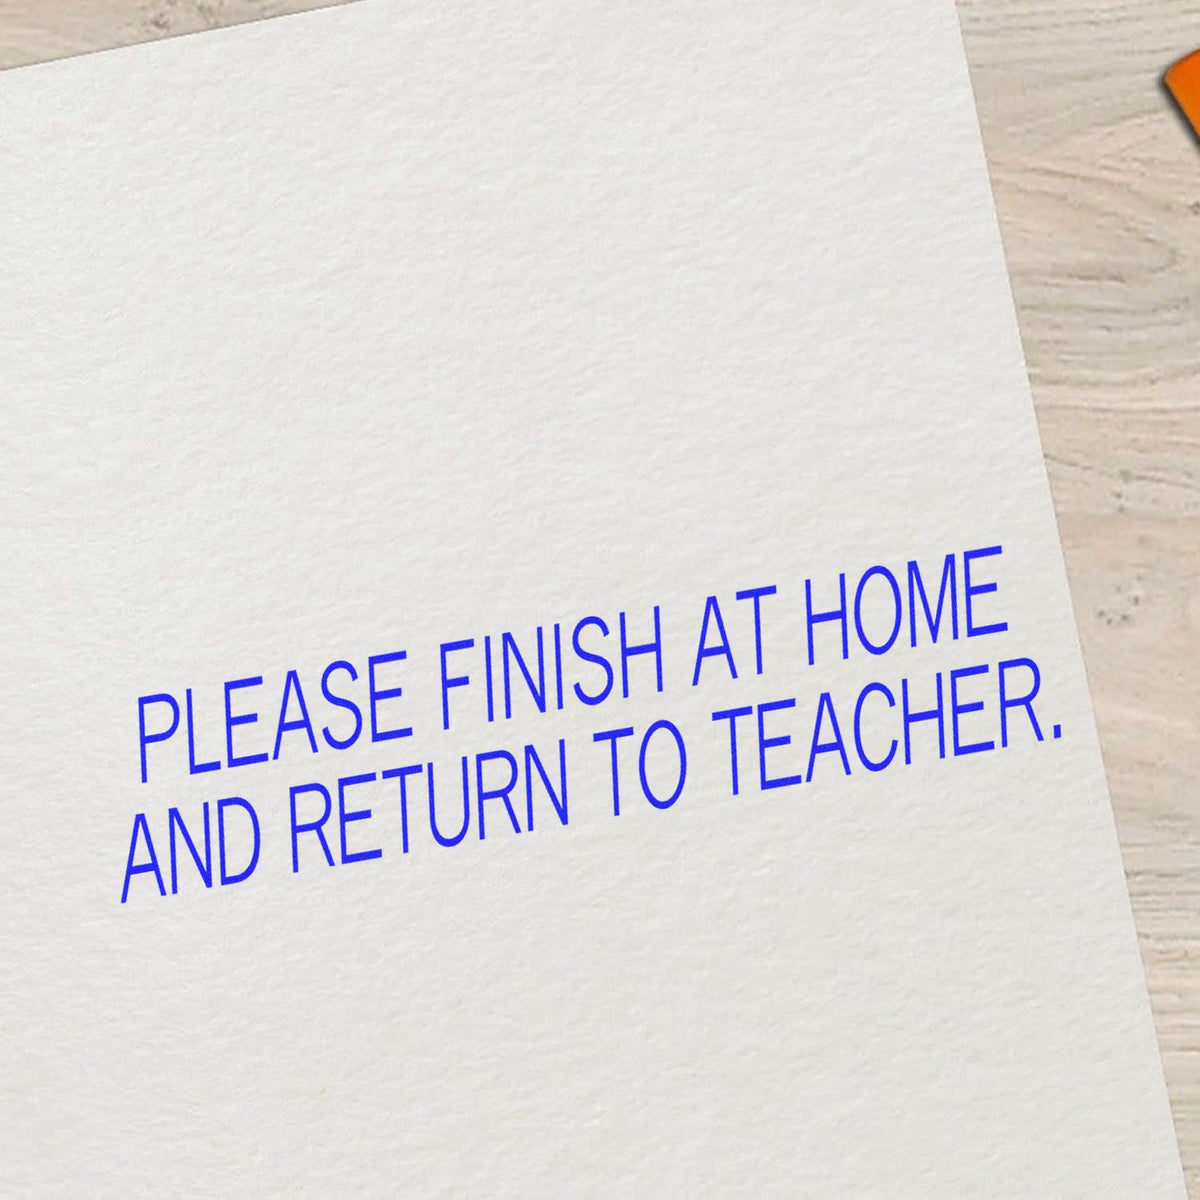 Please Finish At Home Return To Teacher Rubber Stamp In Use Photo